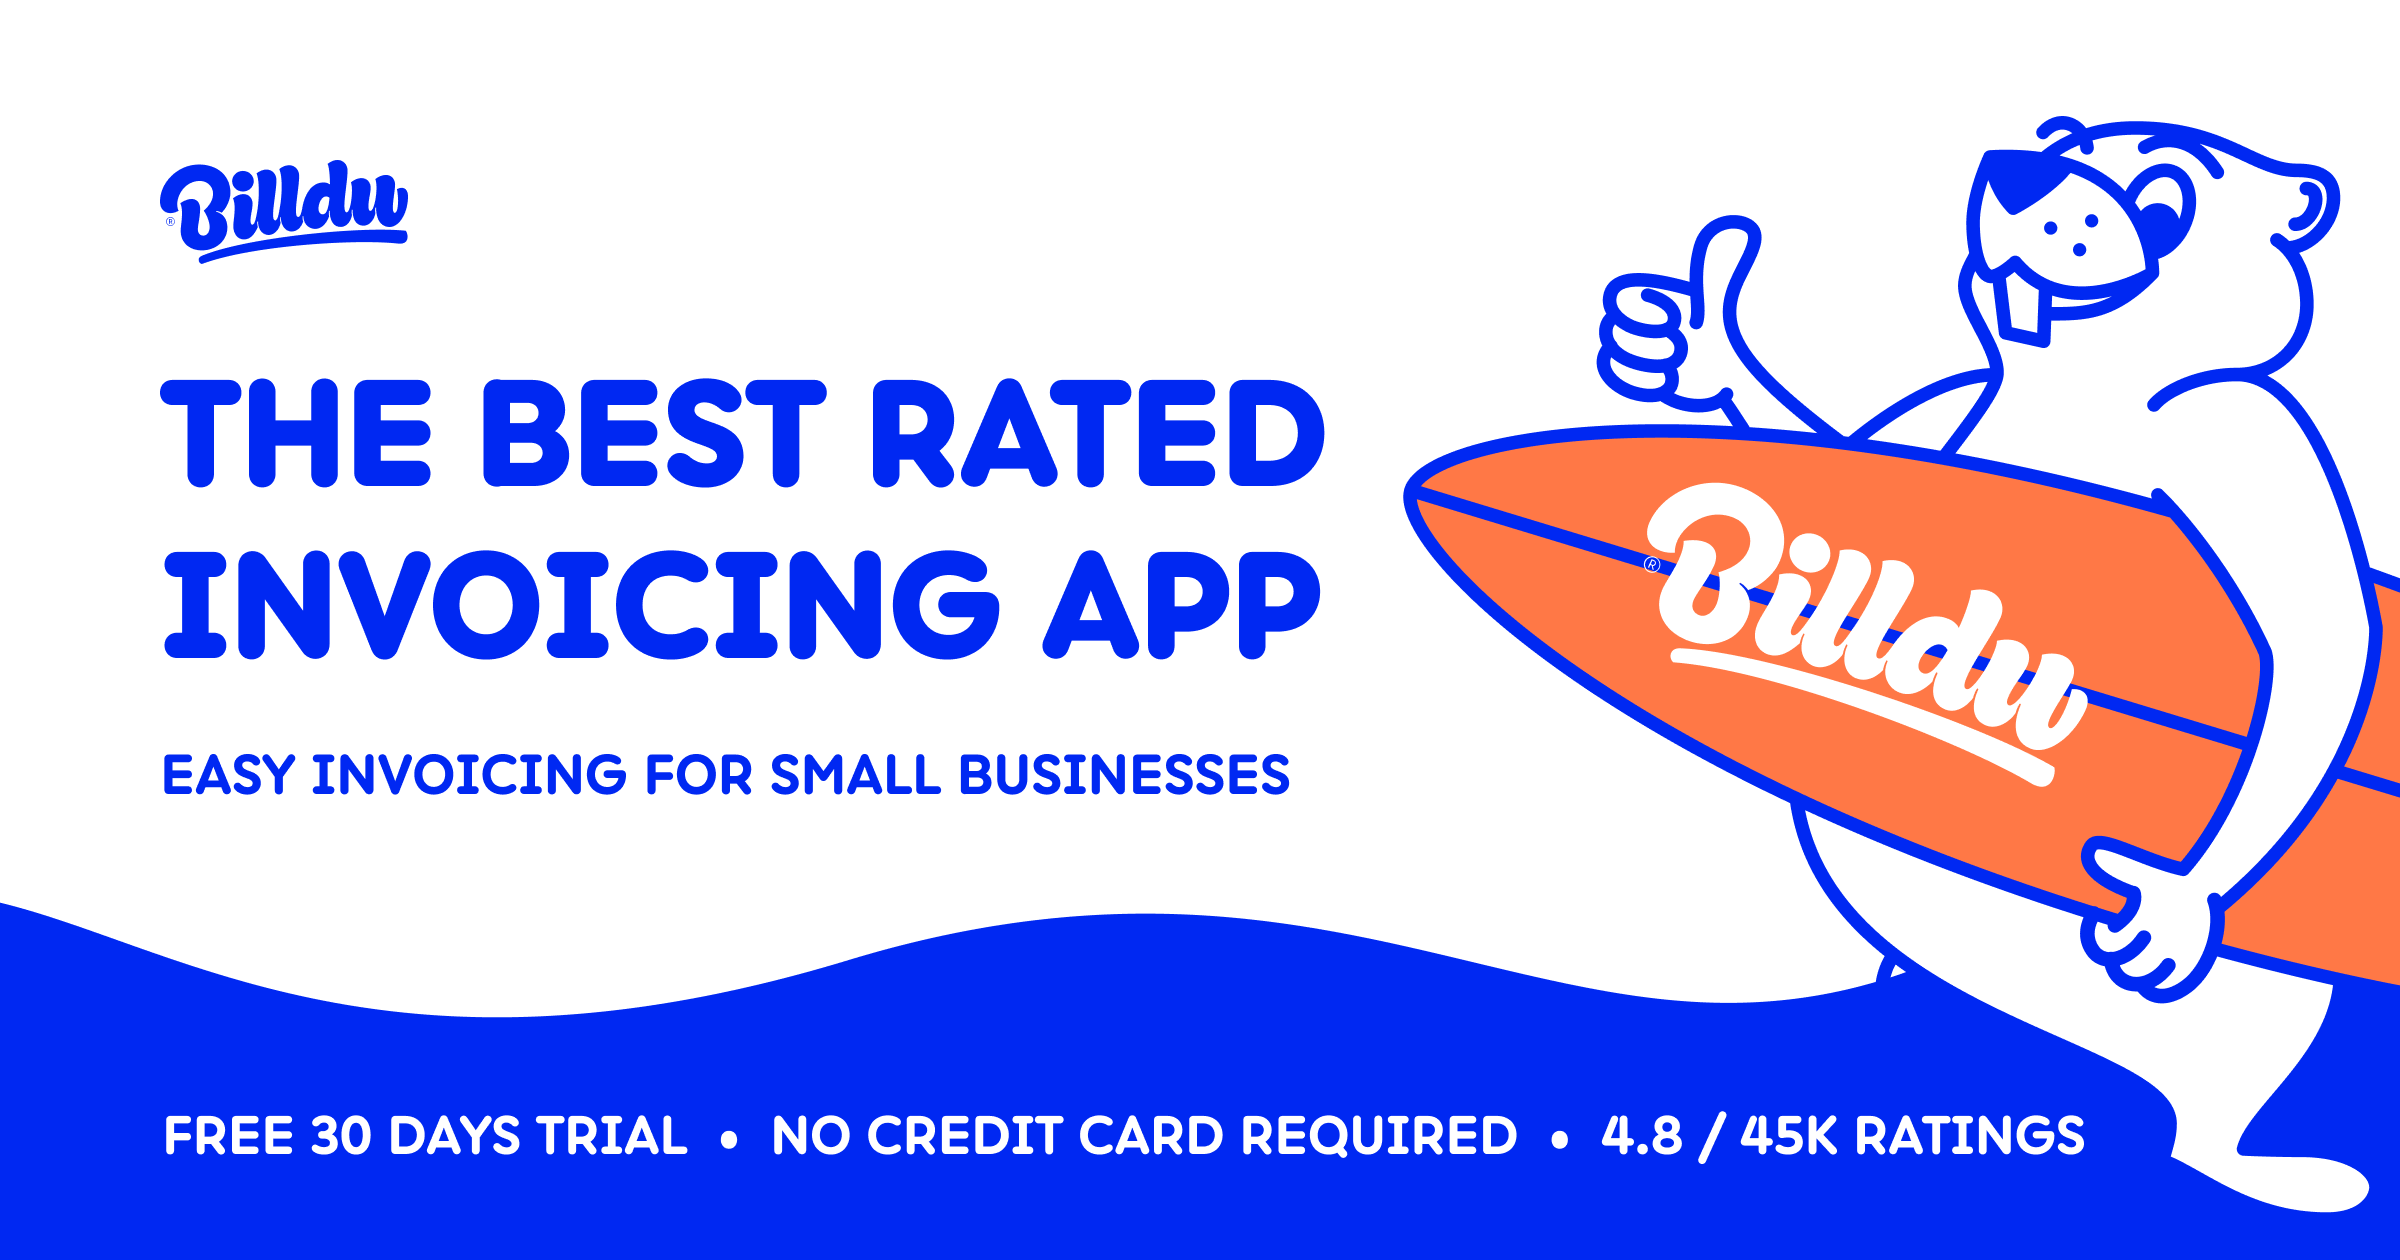 billdu: invoicing software for small businesses